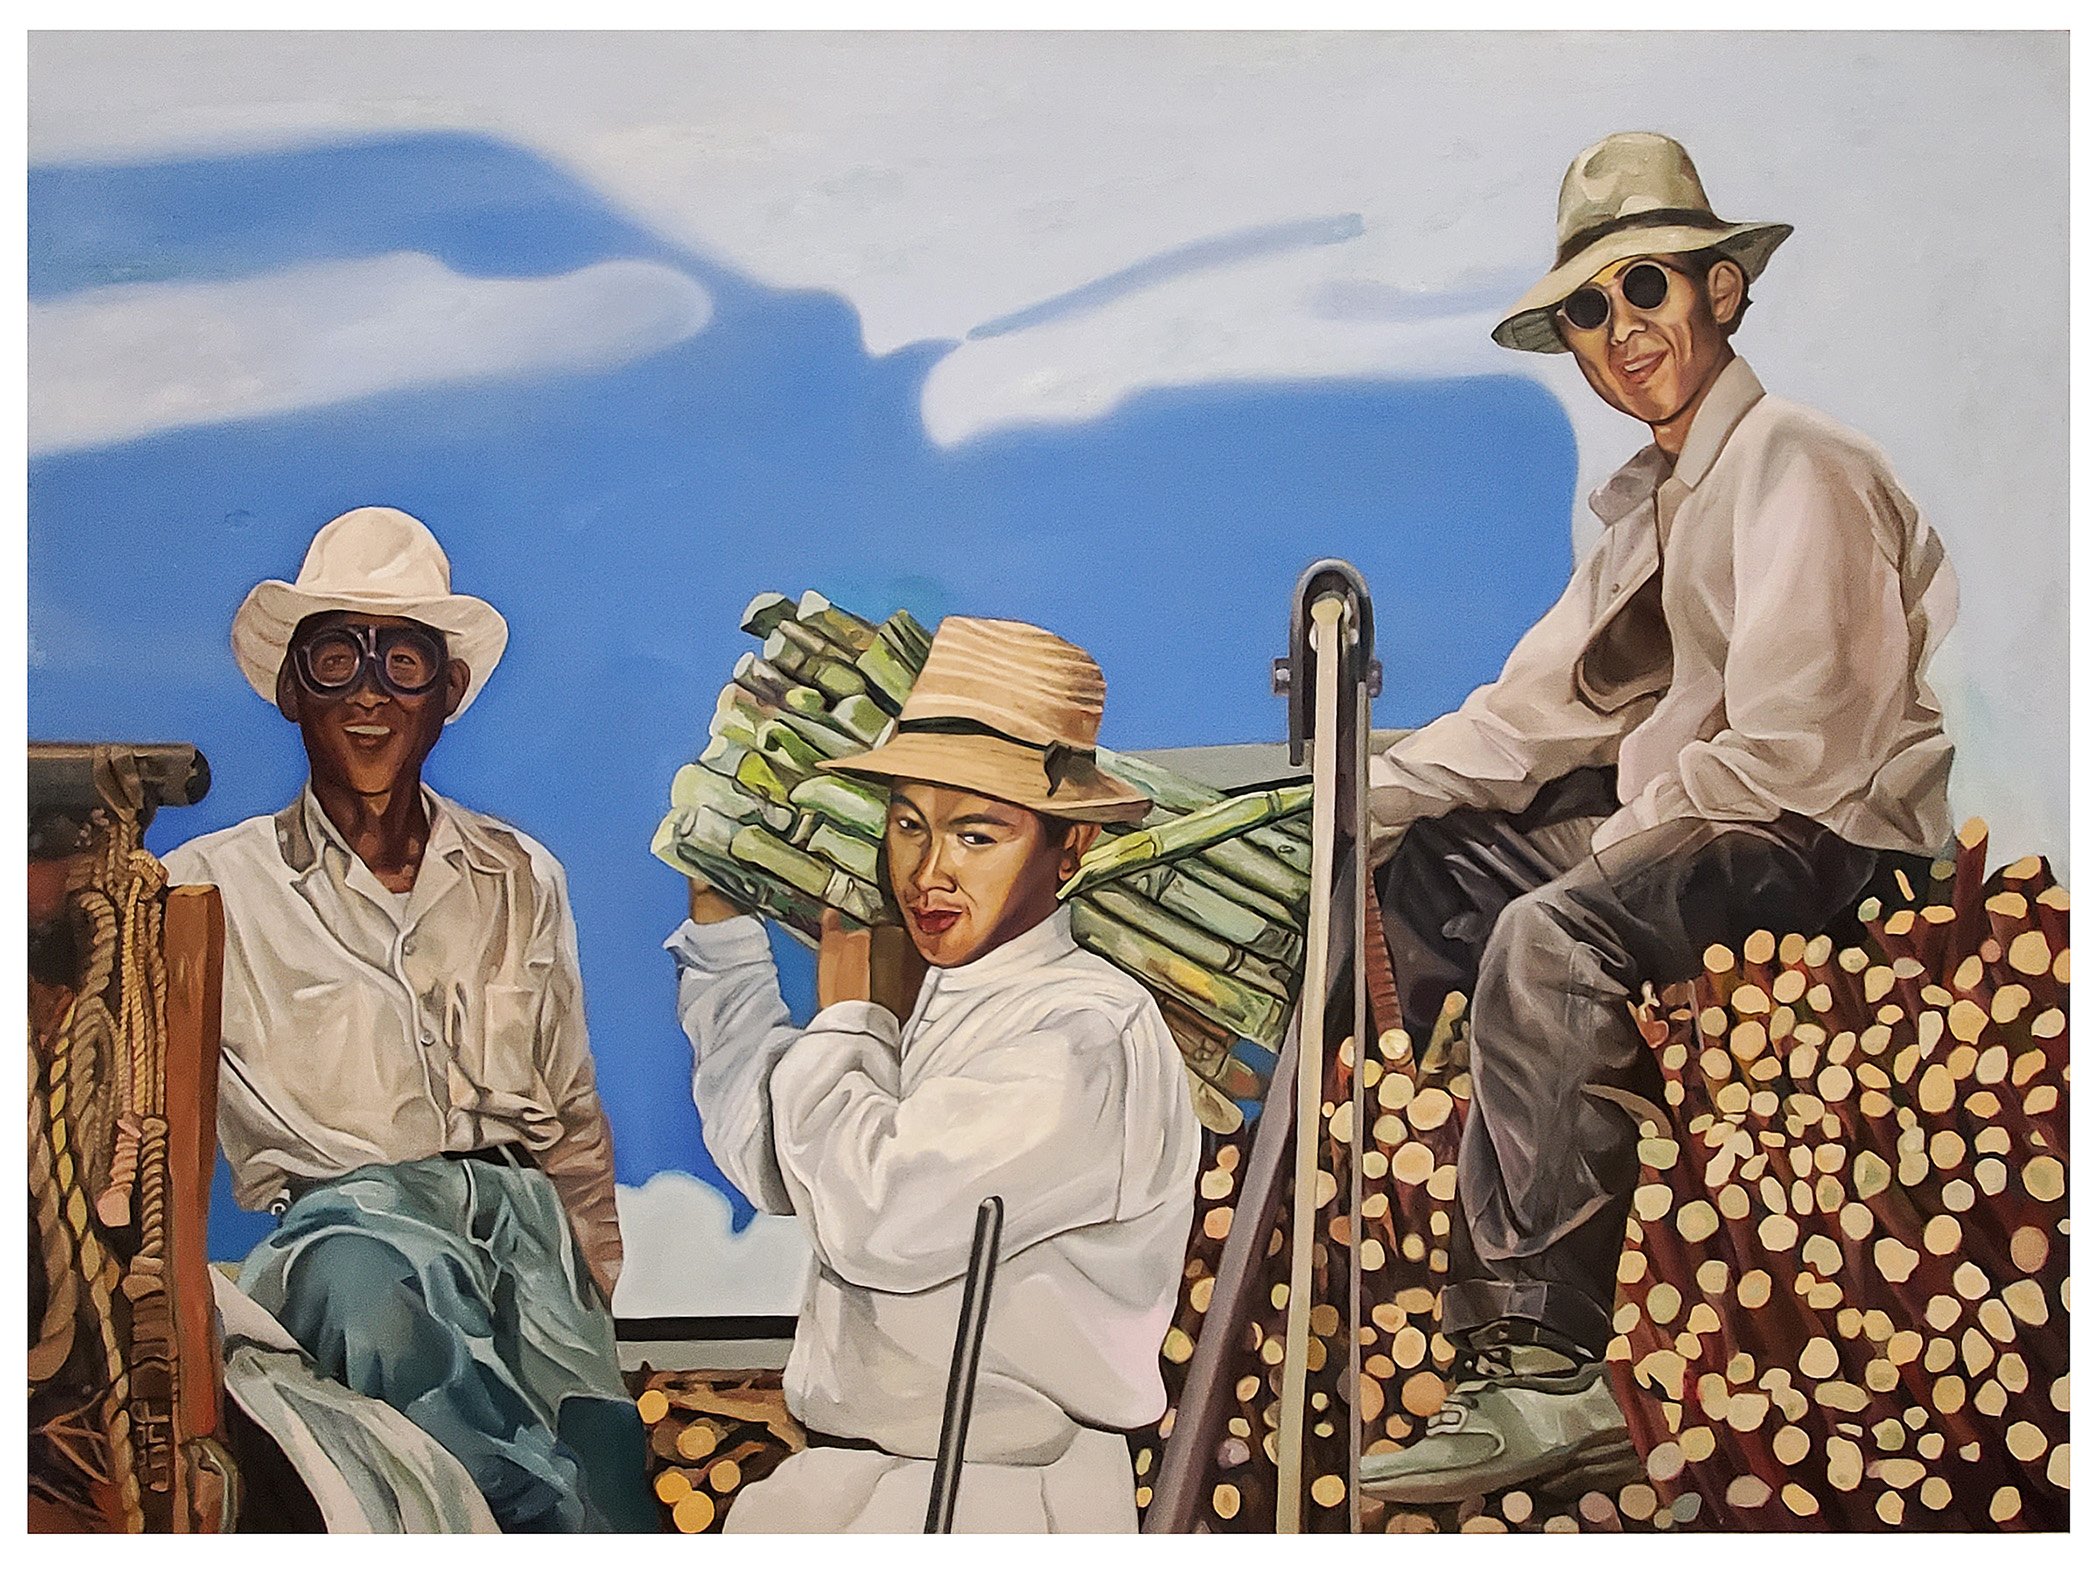 Filipino Workers In A Sugar Cane Plantation in Hawaii